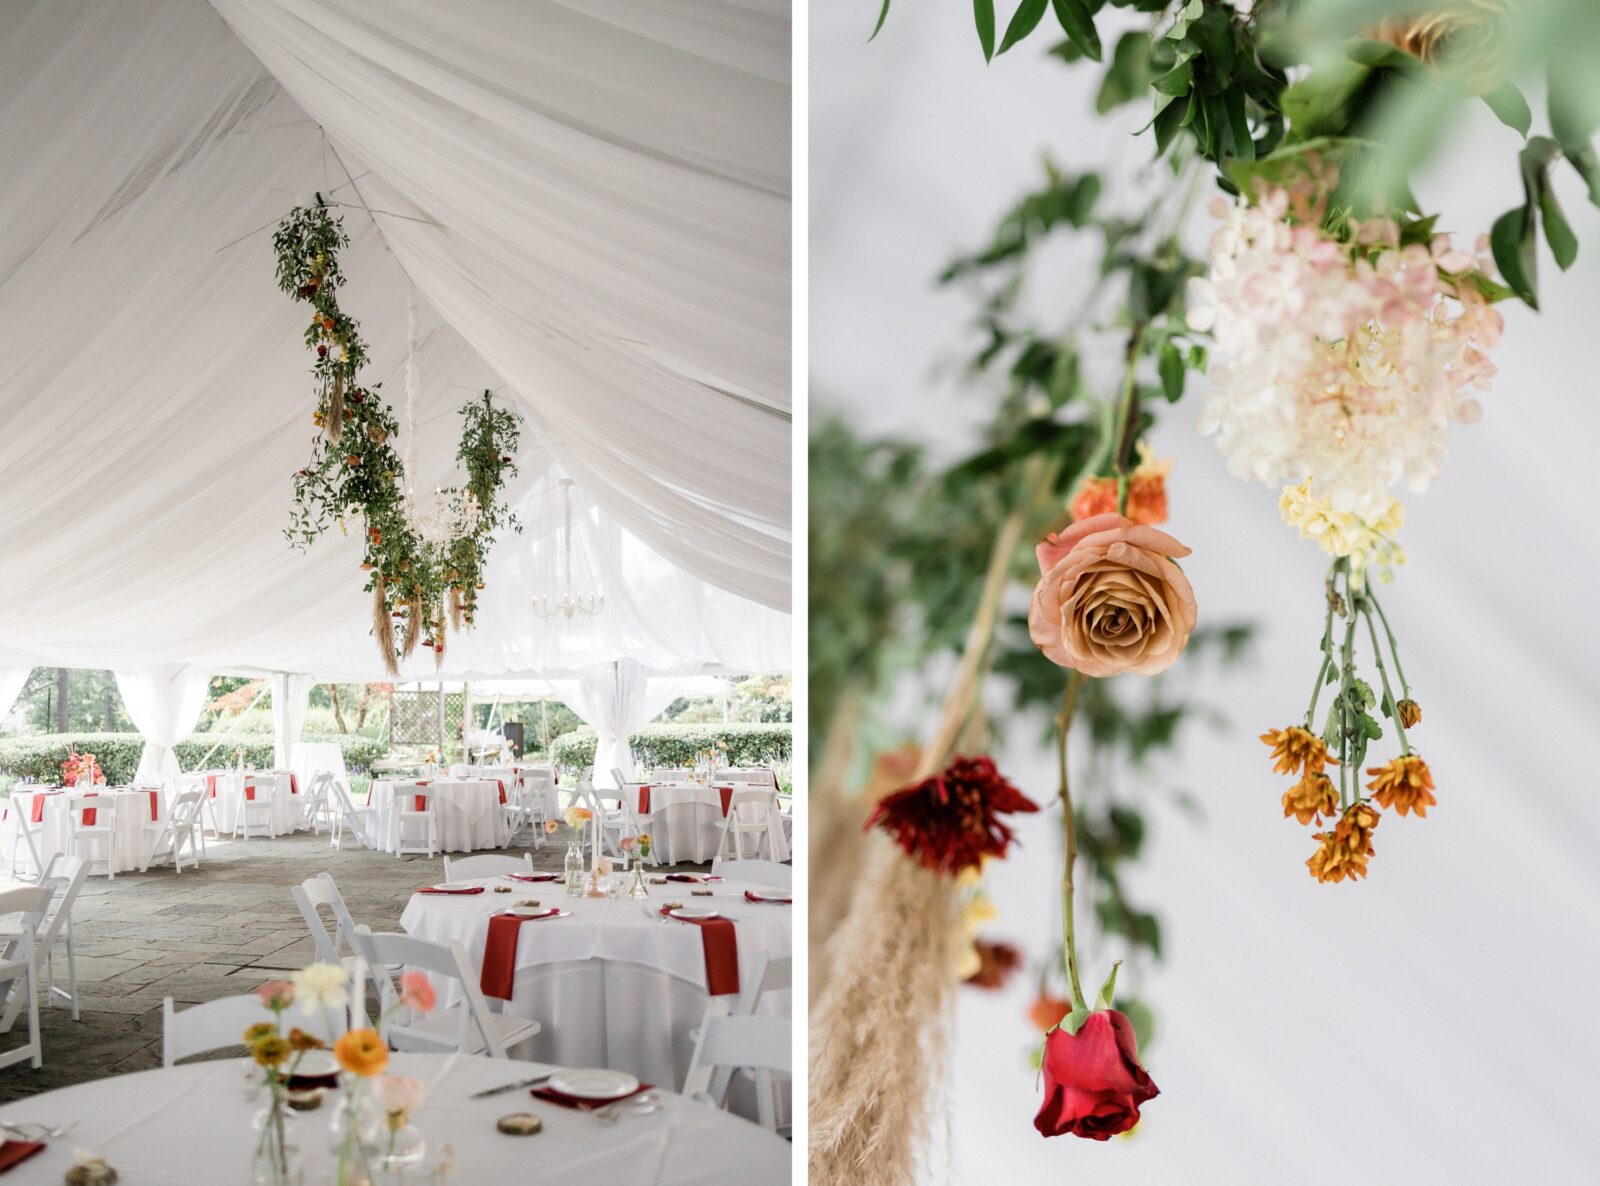 Details of the tent reception at Box Hill Mansion, with fall colors and a hanging flower arrangement photographed by Maria Silva Goyo